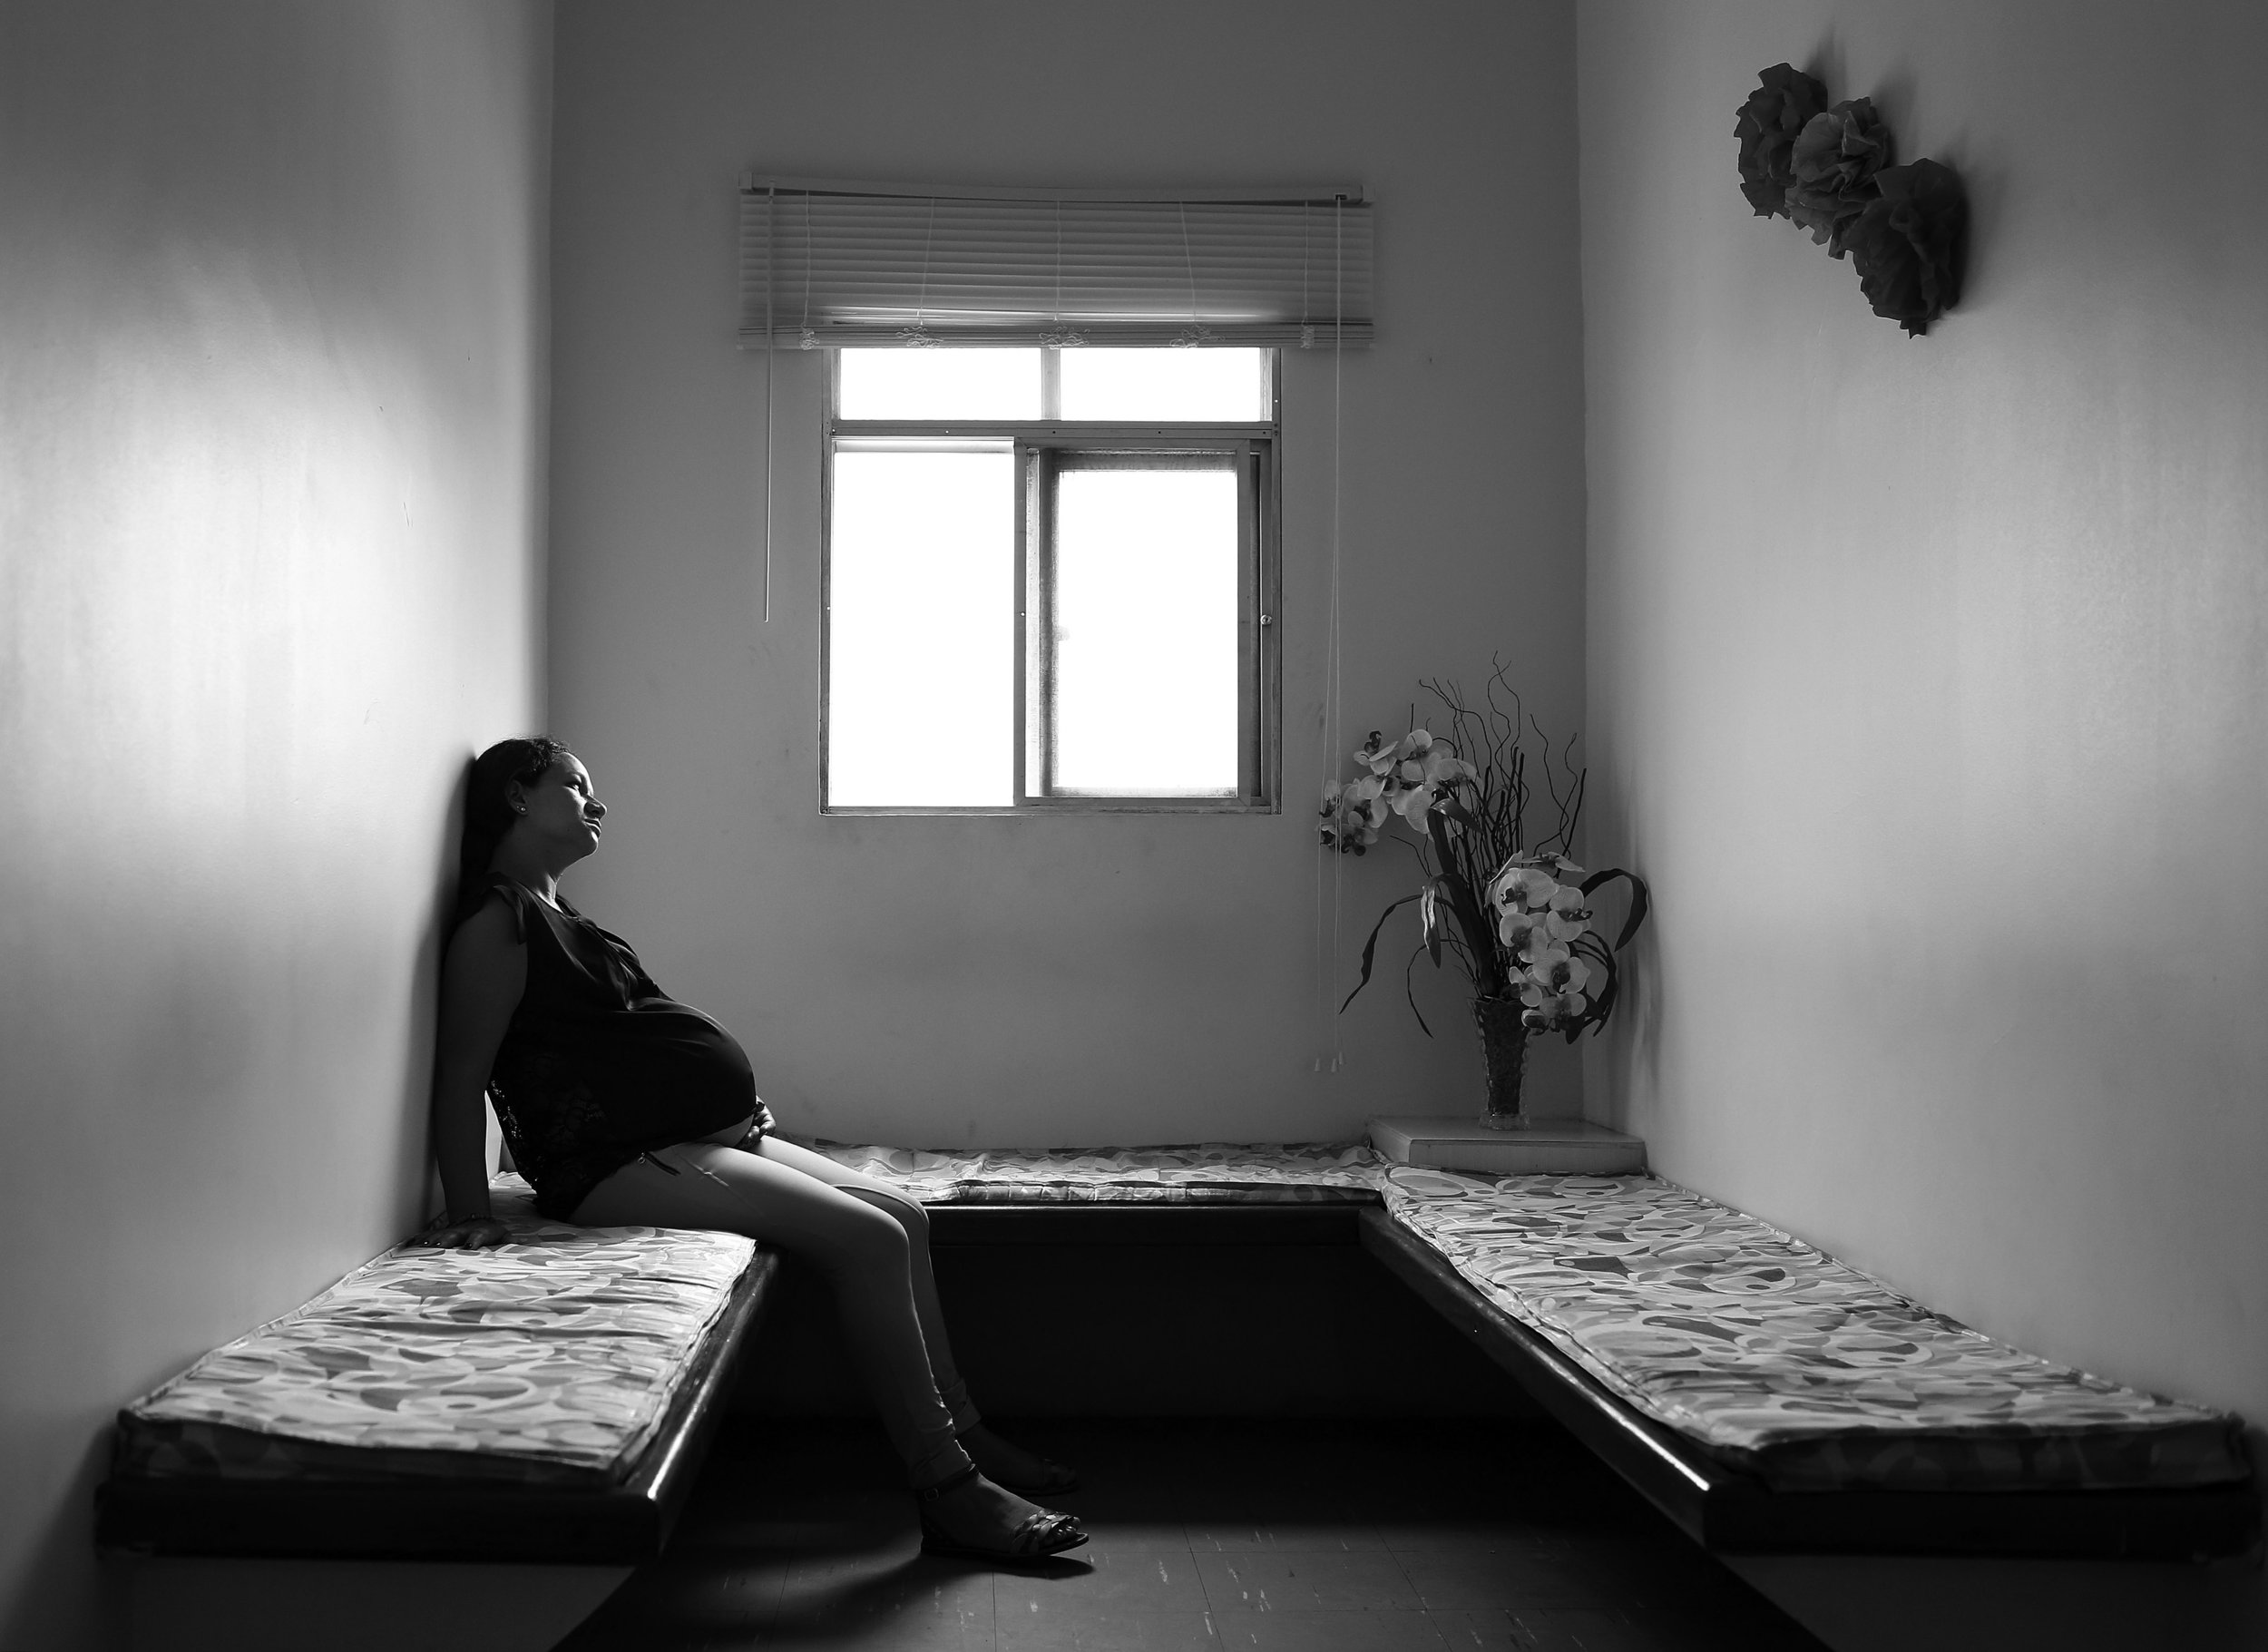  Claudenice Batista, who is eight months pregnant, waits for her appointment in the microcephaly wing of Pedro 1 Municipal Hospital to go over the results of her ultrasound, showing whether or not her baby has microcephaly. Room 117 is where pregnant